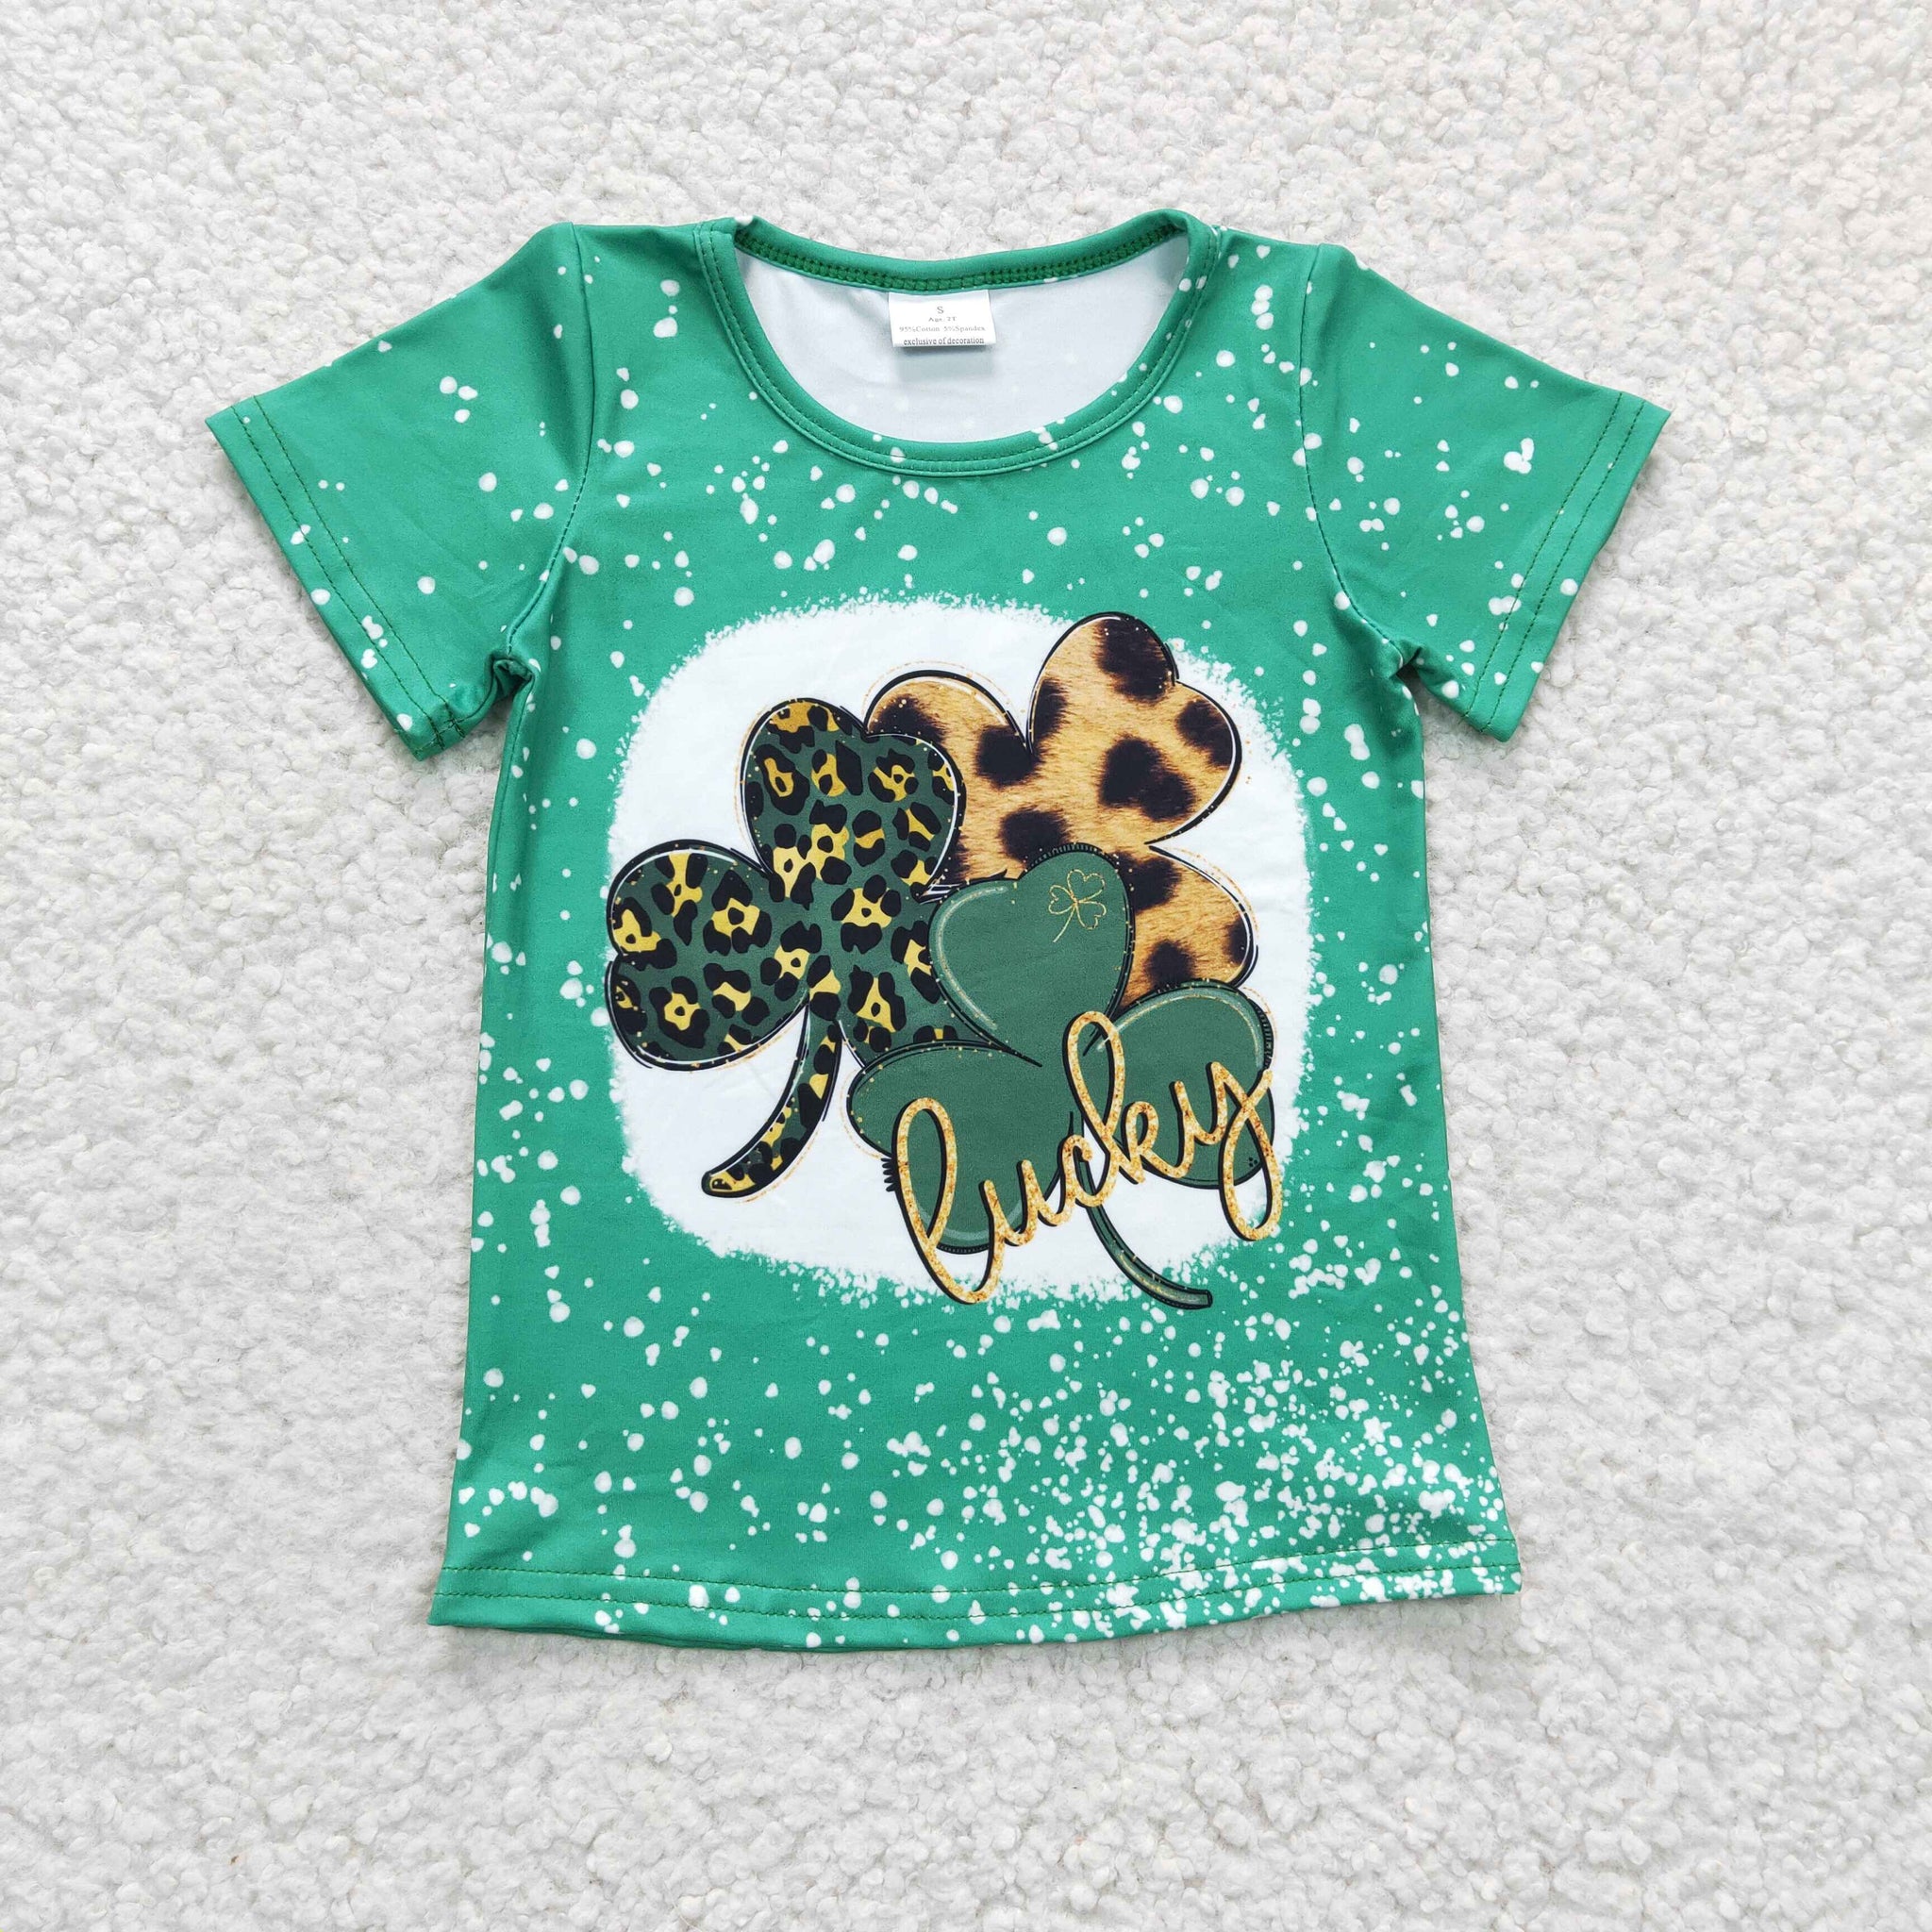 GT0109 baby boy clothes  green St. Patrick's Day tshirt